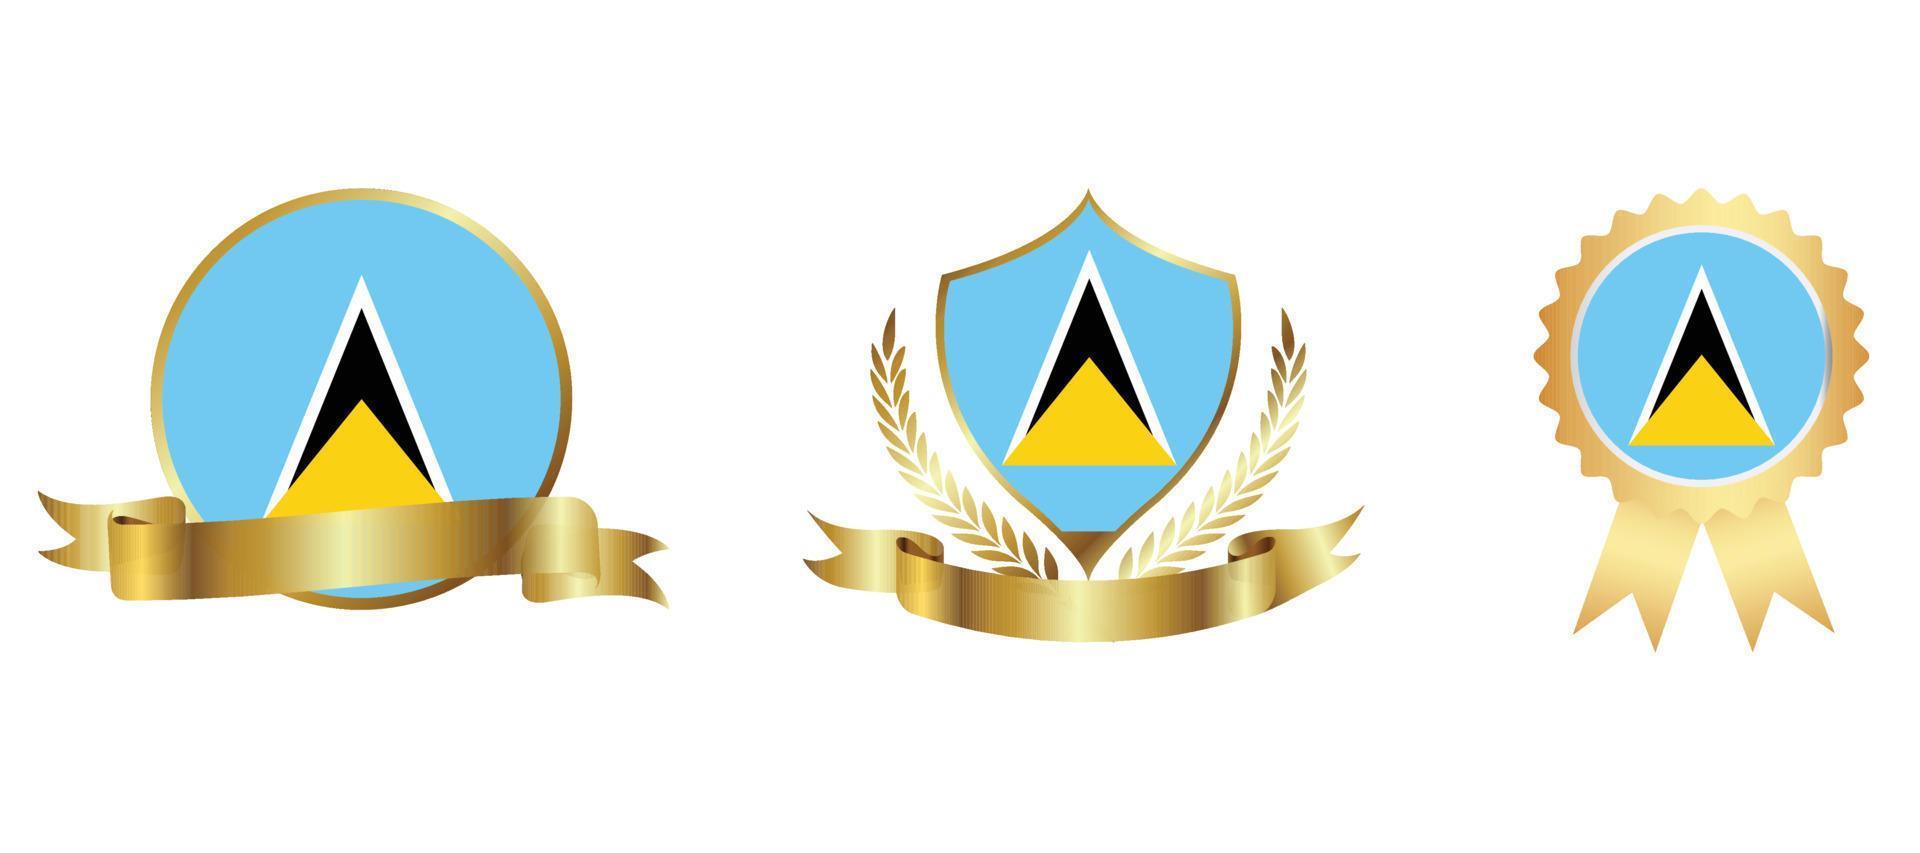 Saint Lucia flag icon . web icon set . icons collection flat. Simple vector illustration.